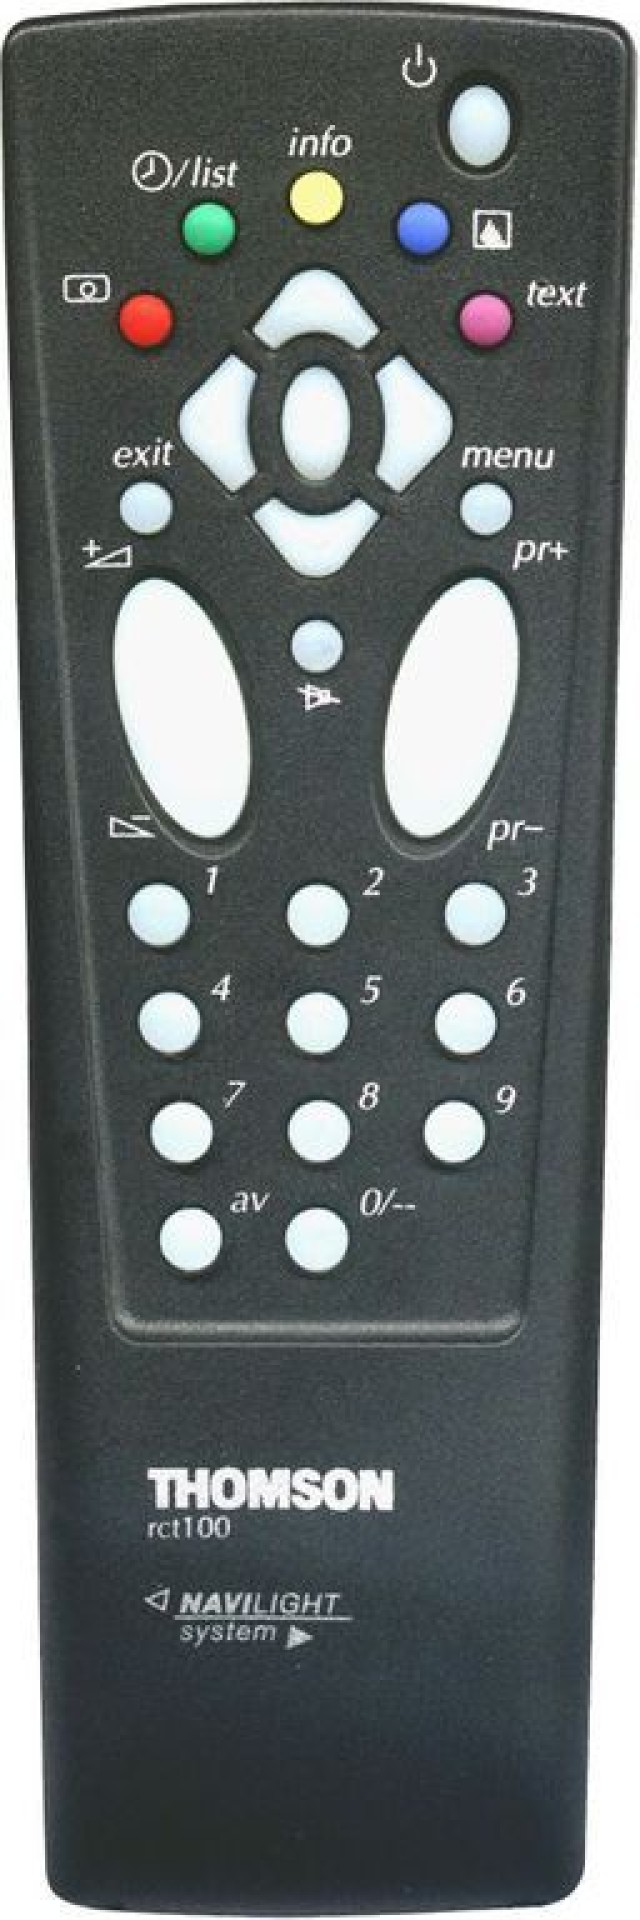 OEM, 0077, Remote control compatible with THOMSON RCT100